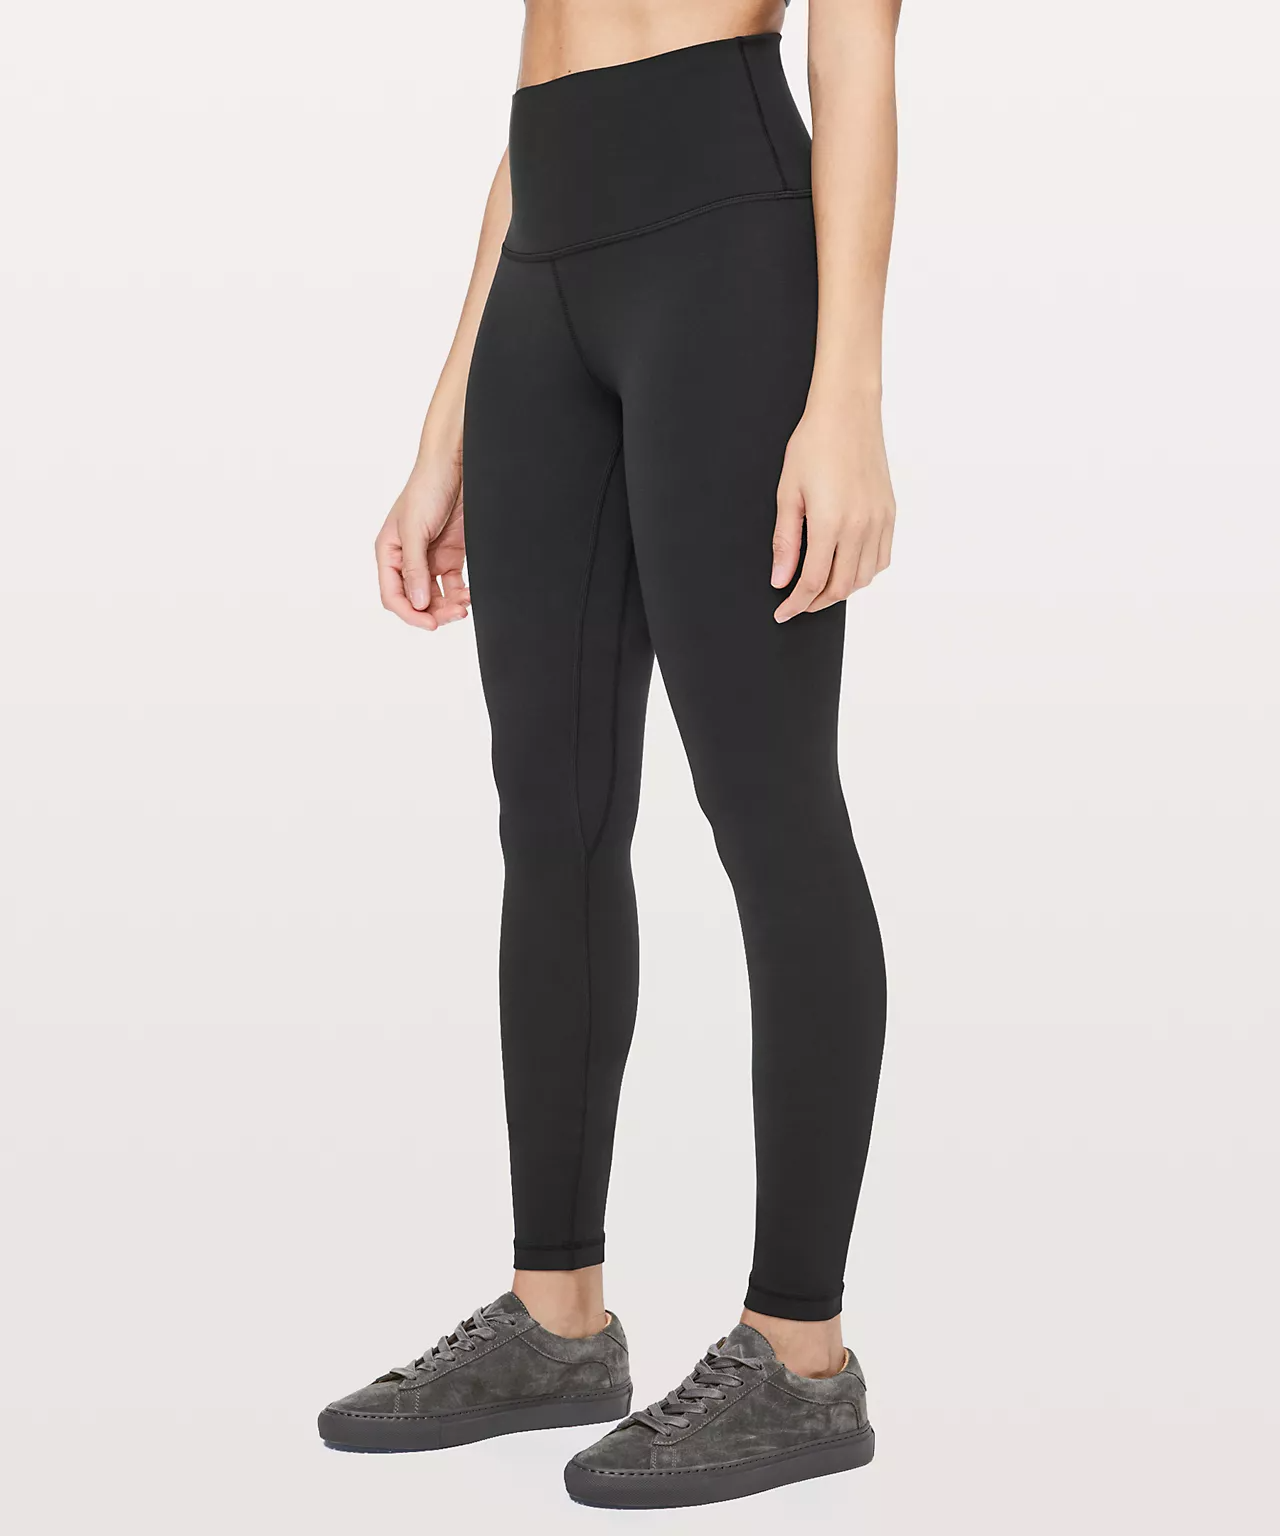 Lululemon Align High Rise Pant 25” size 20 - recoveryparade-japan.com